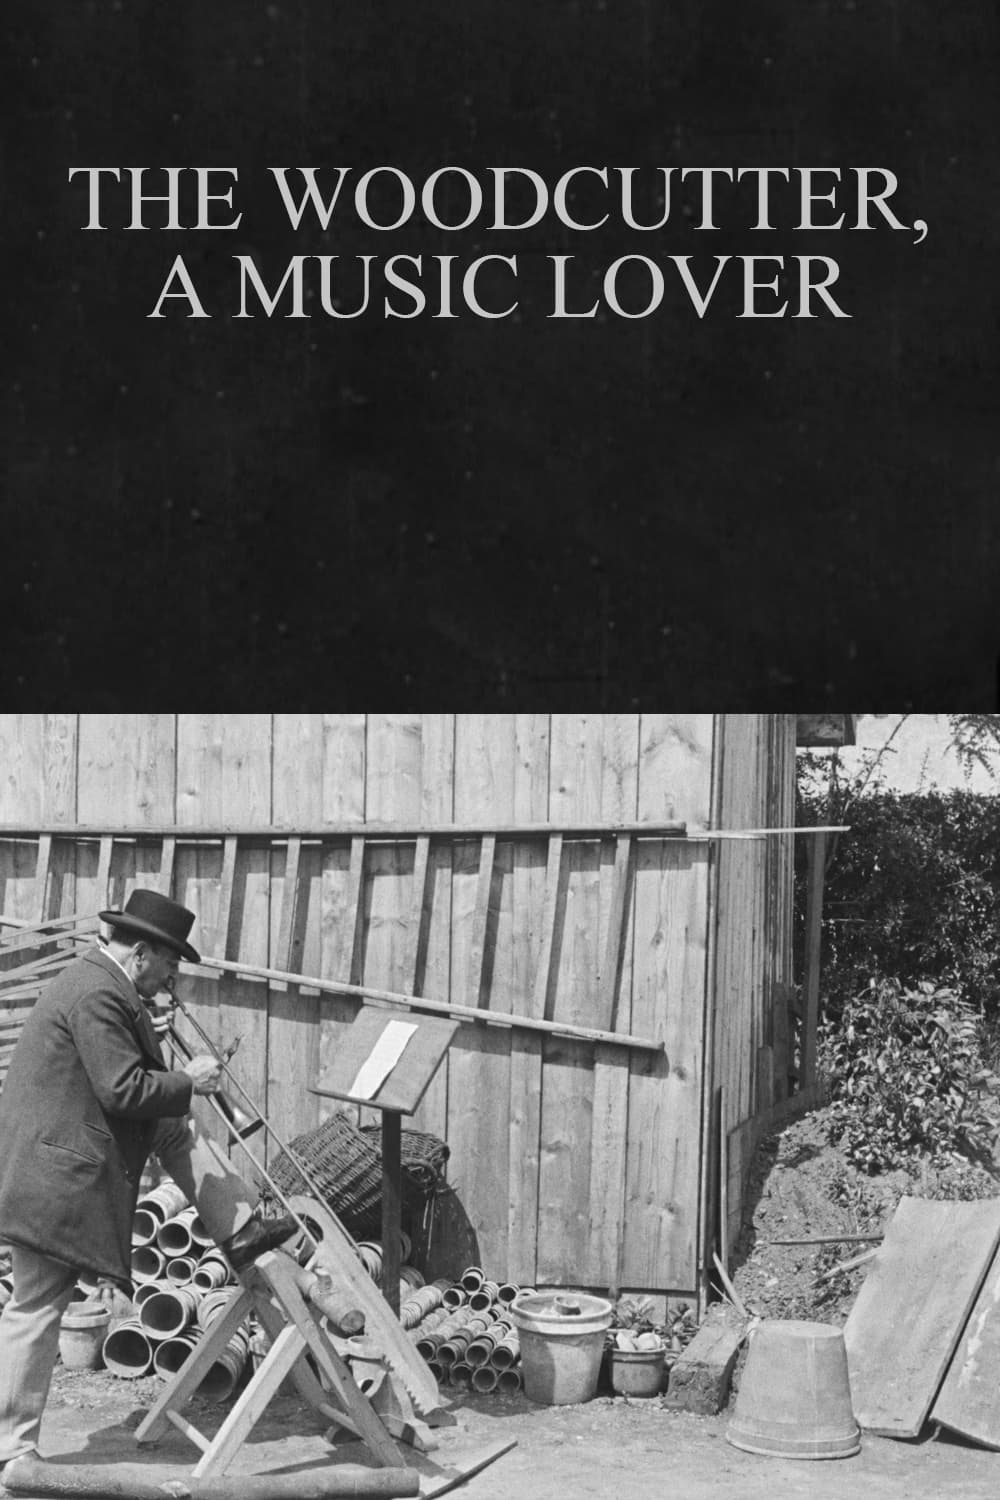 The Woodcutter, a Music Lover